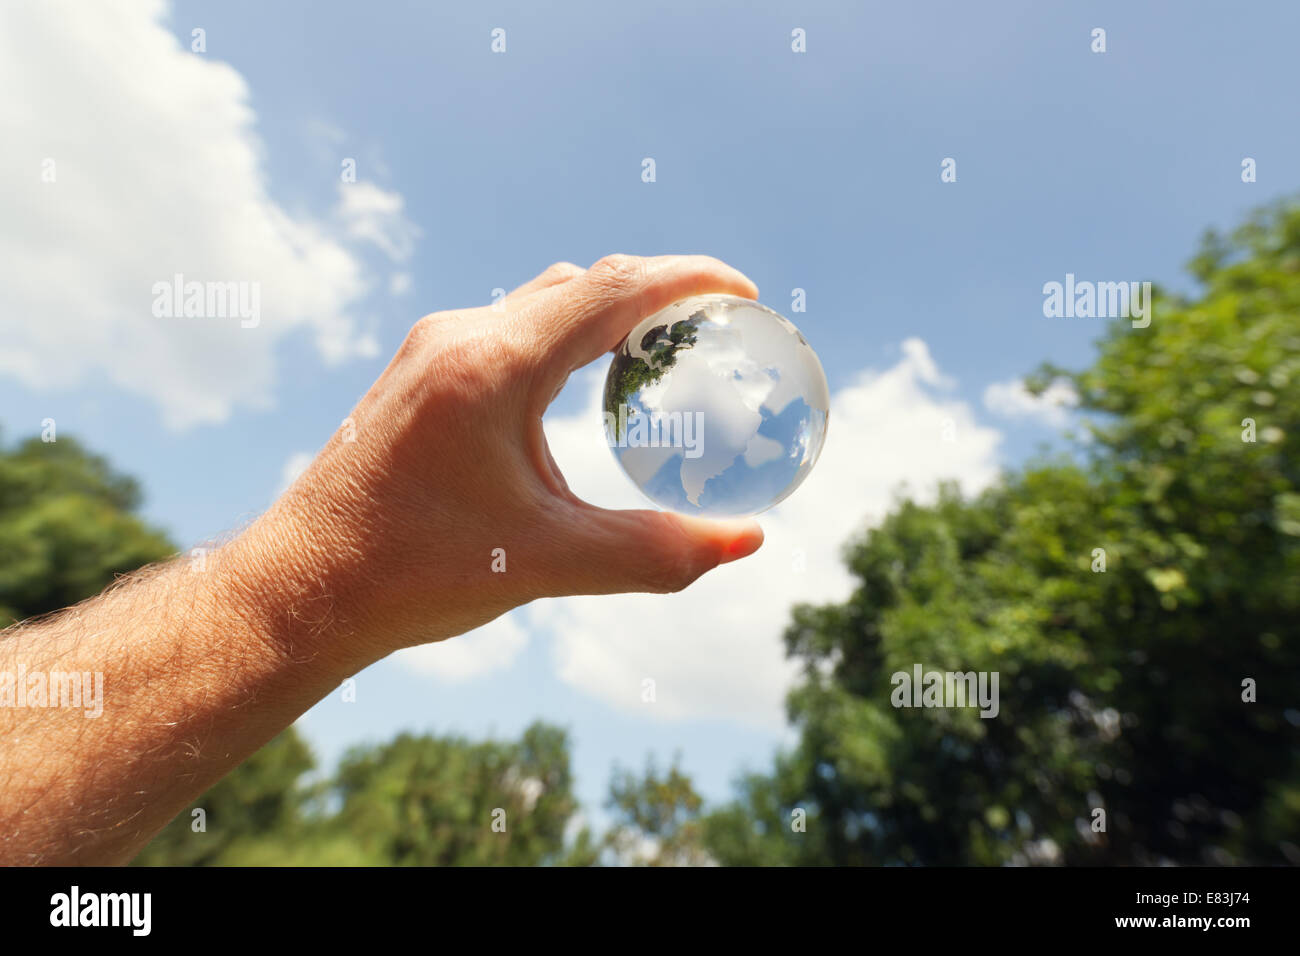 Holding a glass globe to blue sky,trees and field Stock Photo